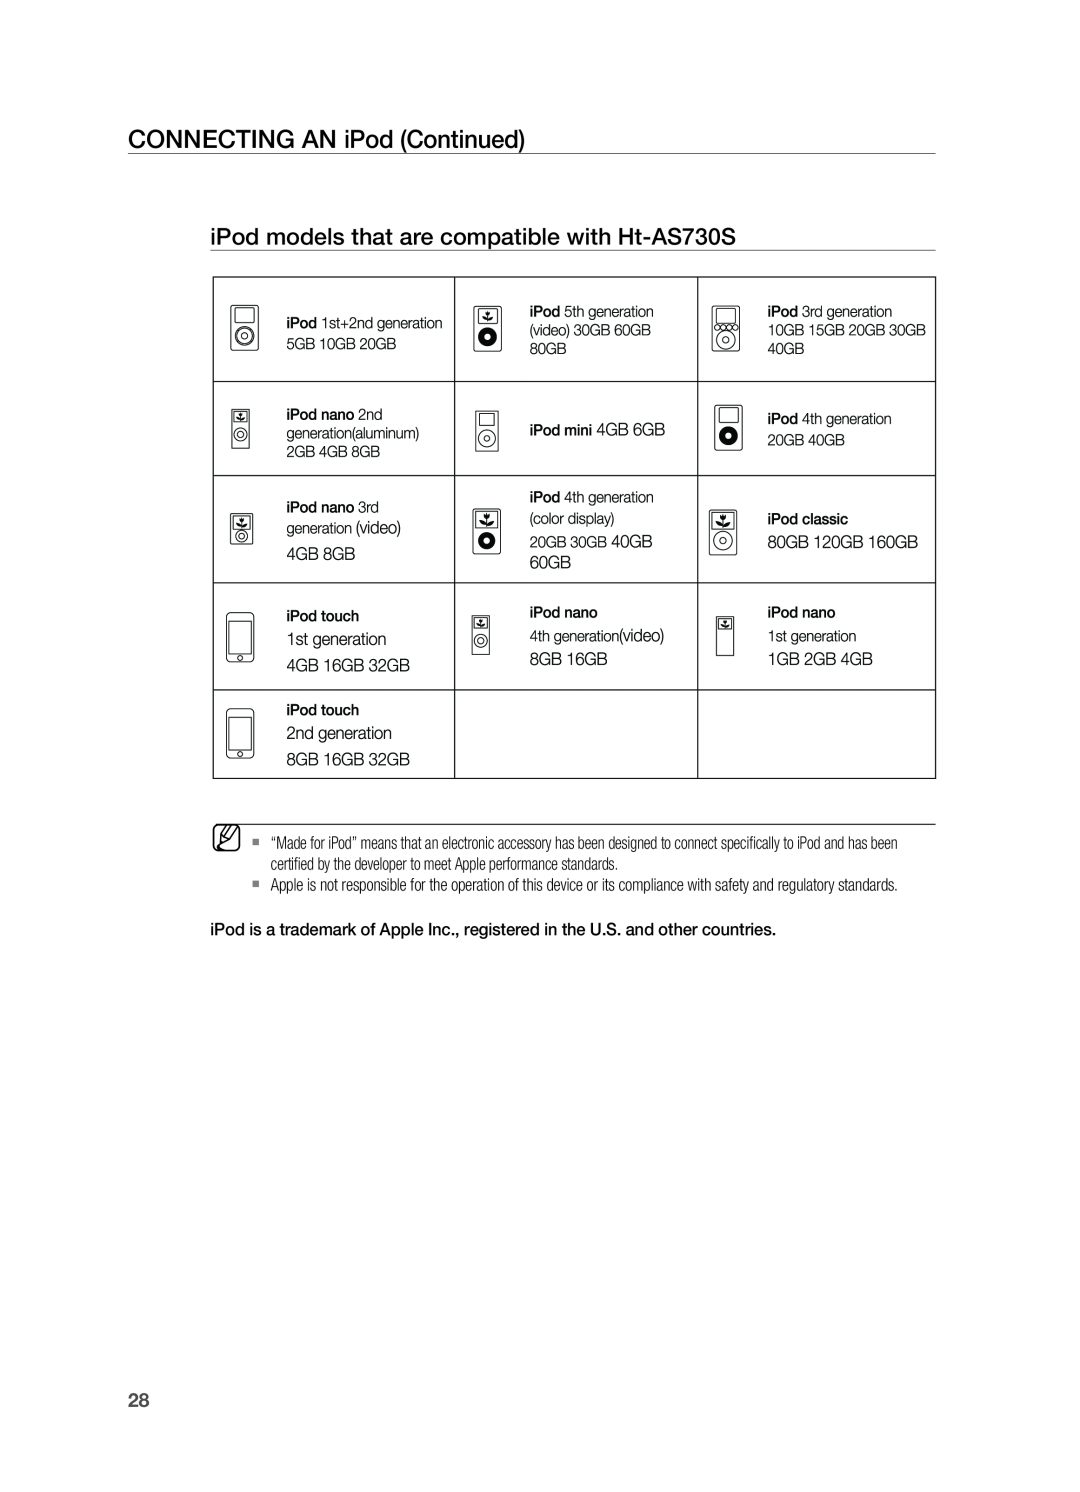 Samsung HT-AS730S user manual Connecting an iPod Continued, iPod models that are compatible with Ht-AS730S 